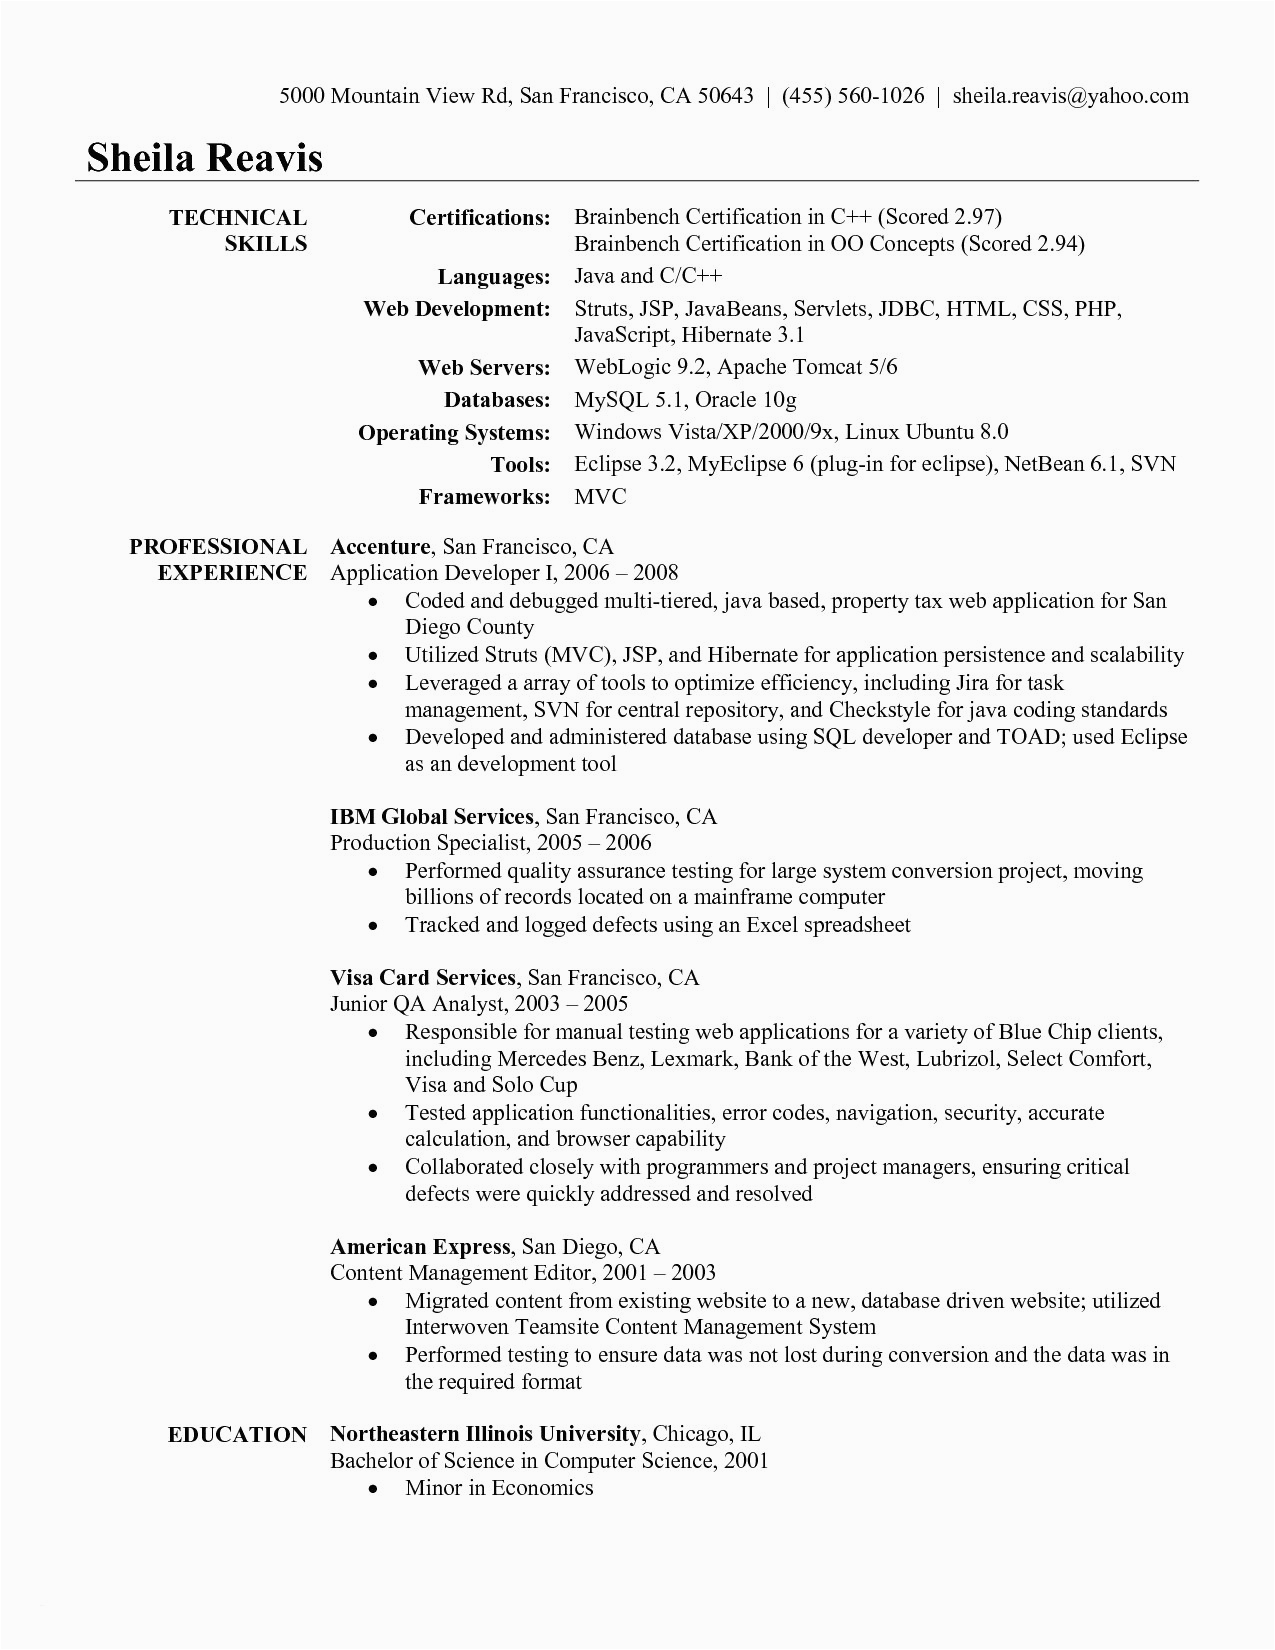 Sample Resume for software Tester 2 Years Experience Spreadsheet Driven Web Applications within Resume for 2 Years